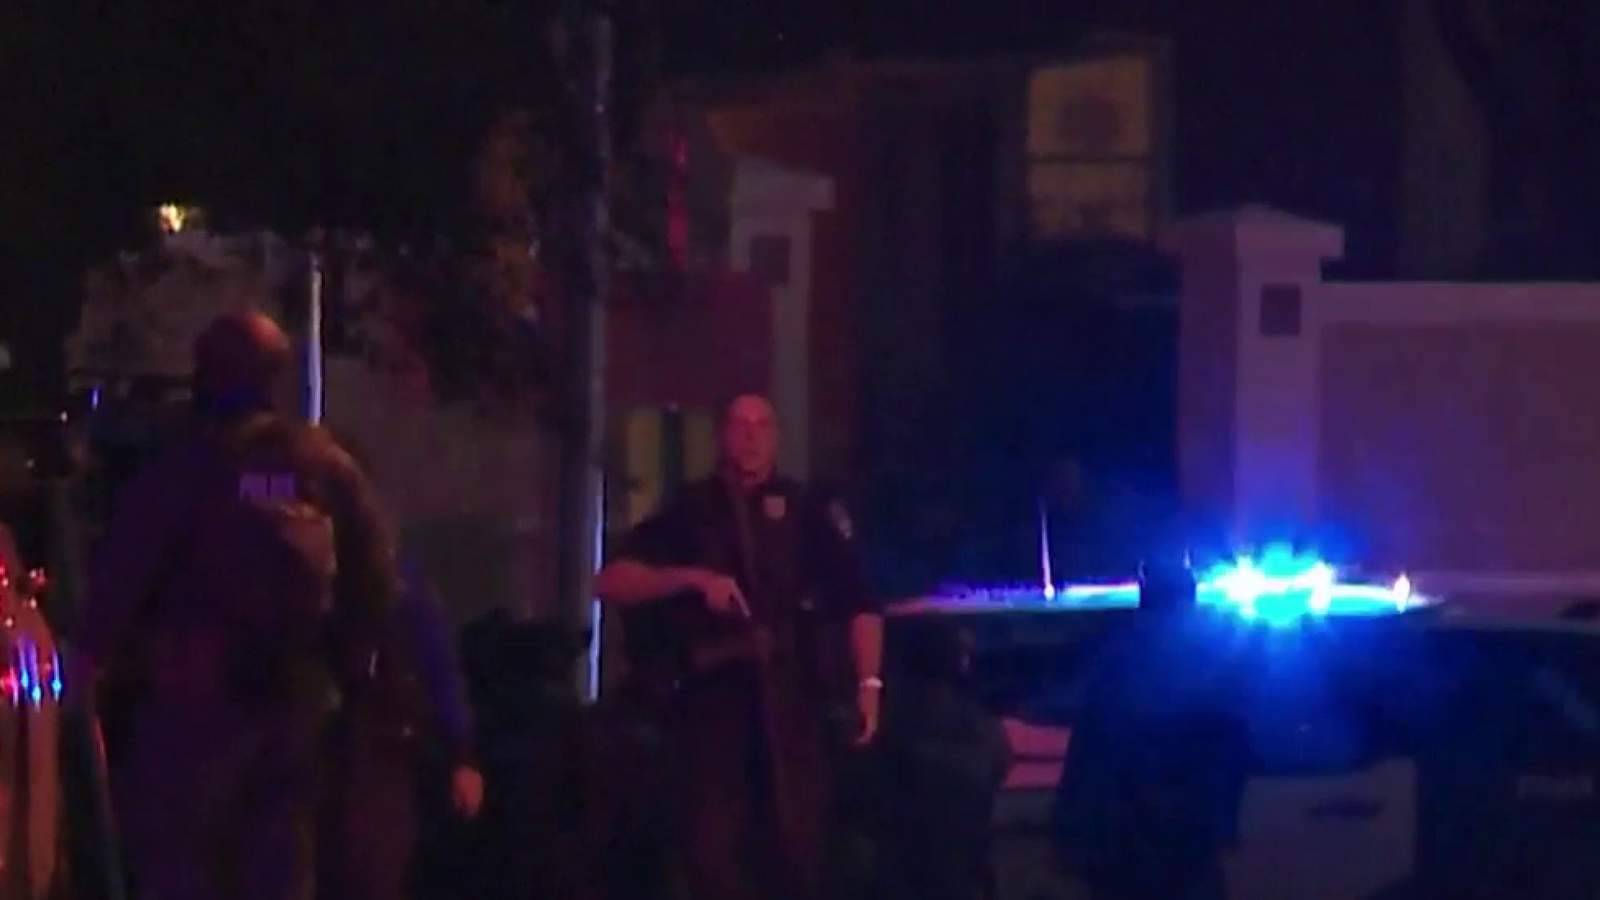 2 dead in apparent hostage situation following standoff at Austin pediatric office